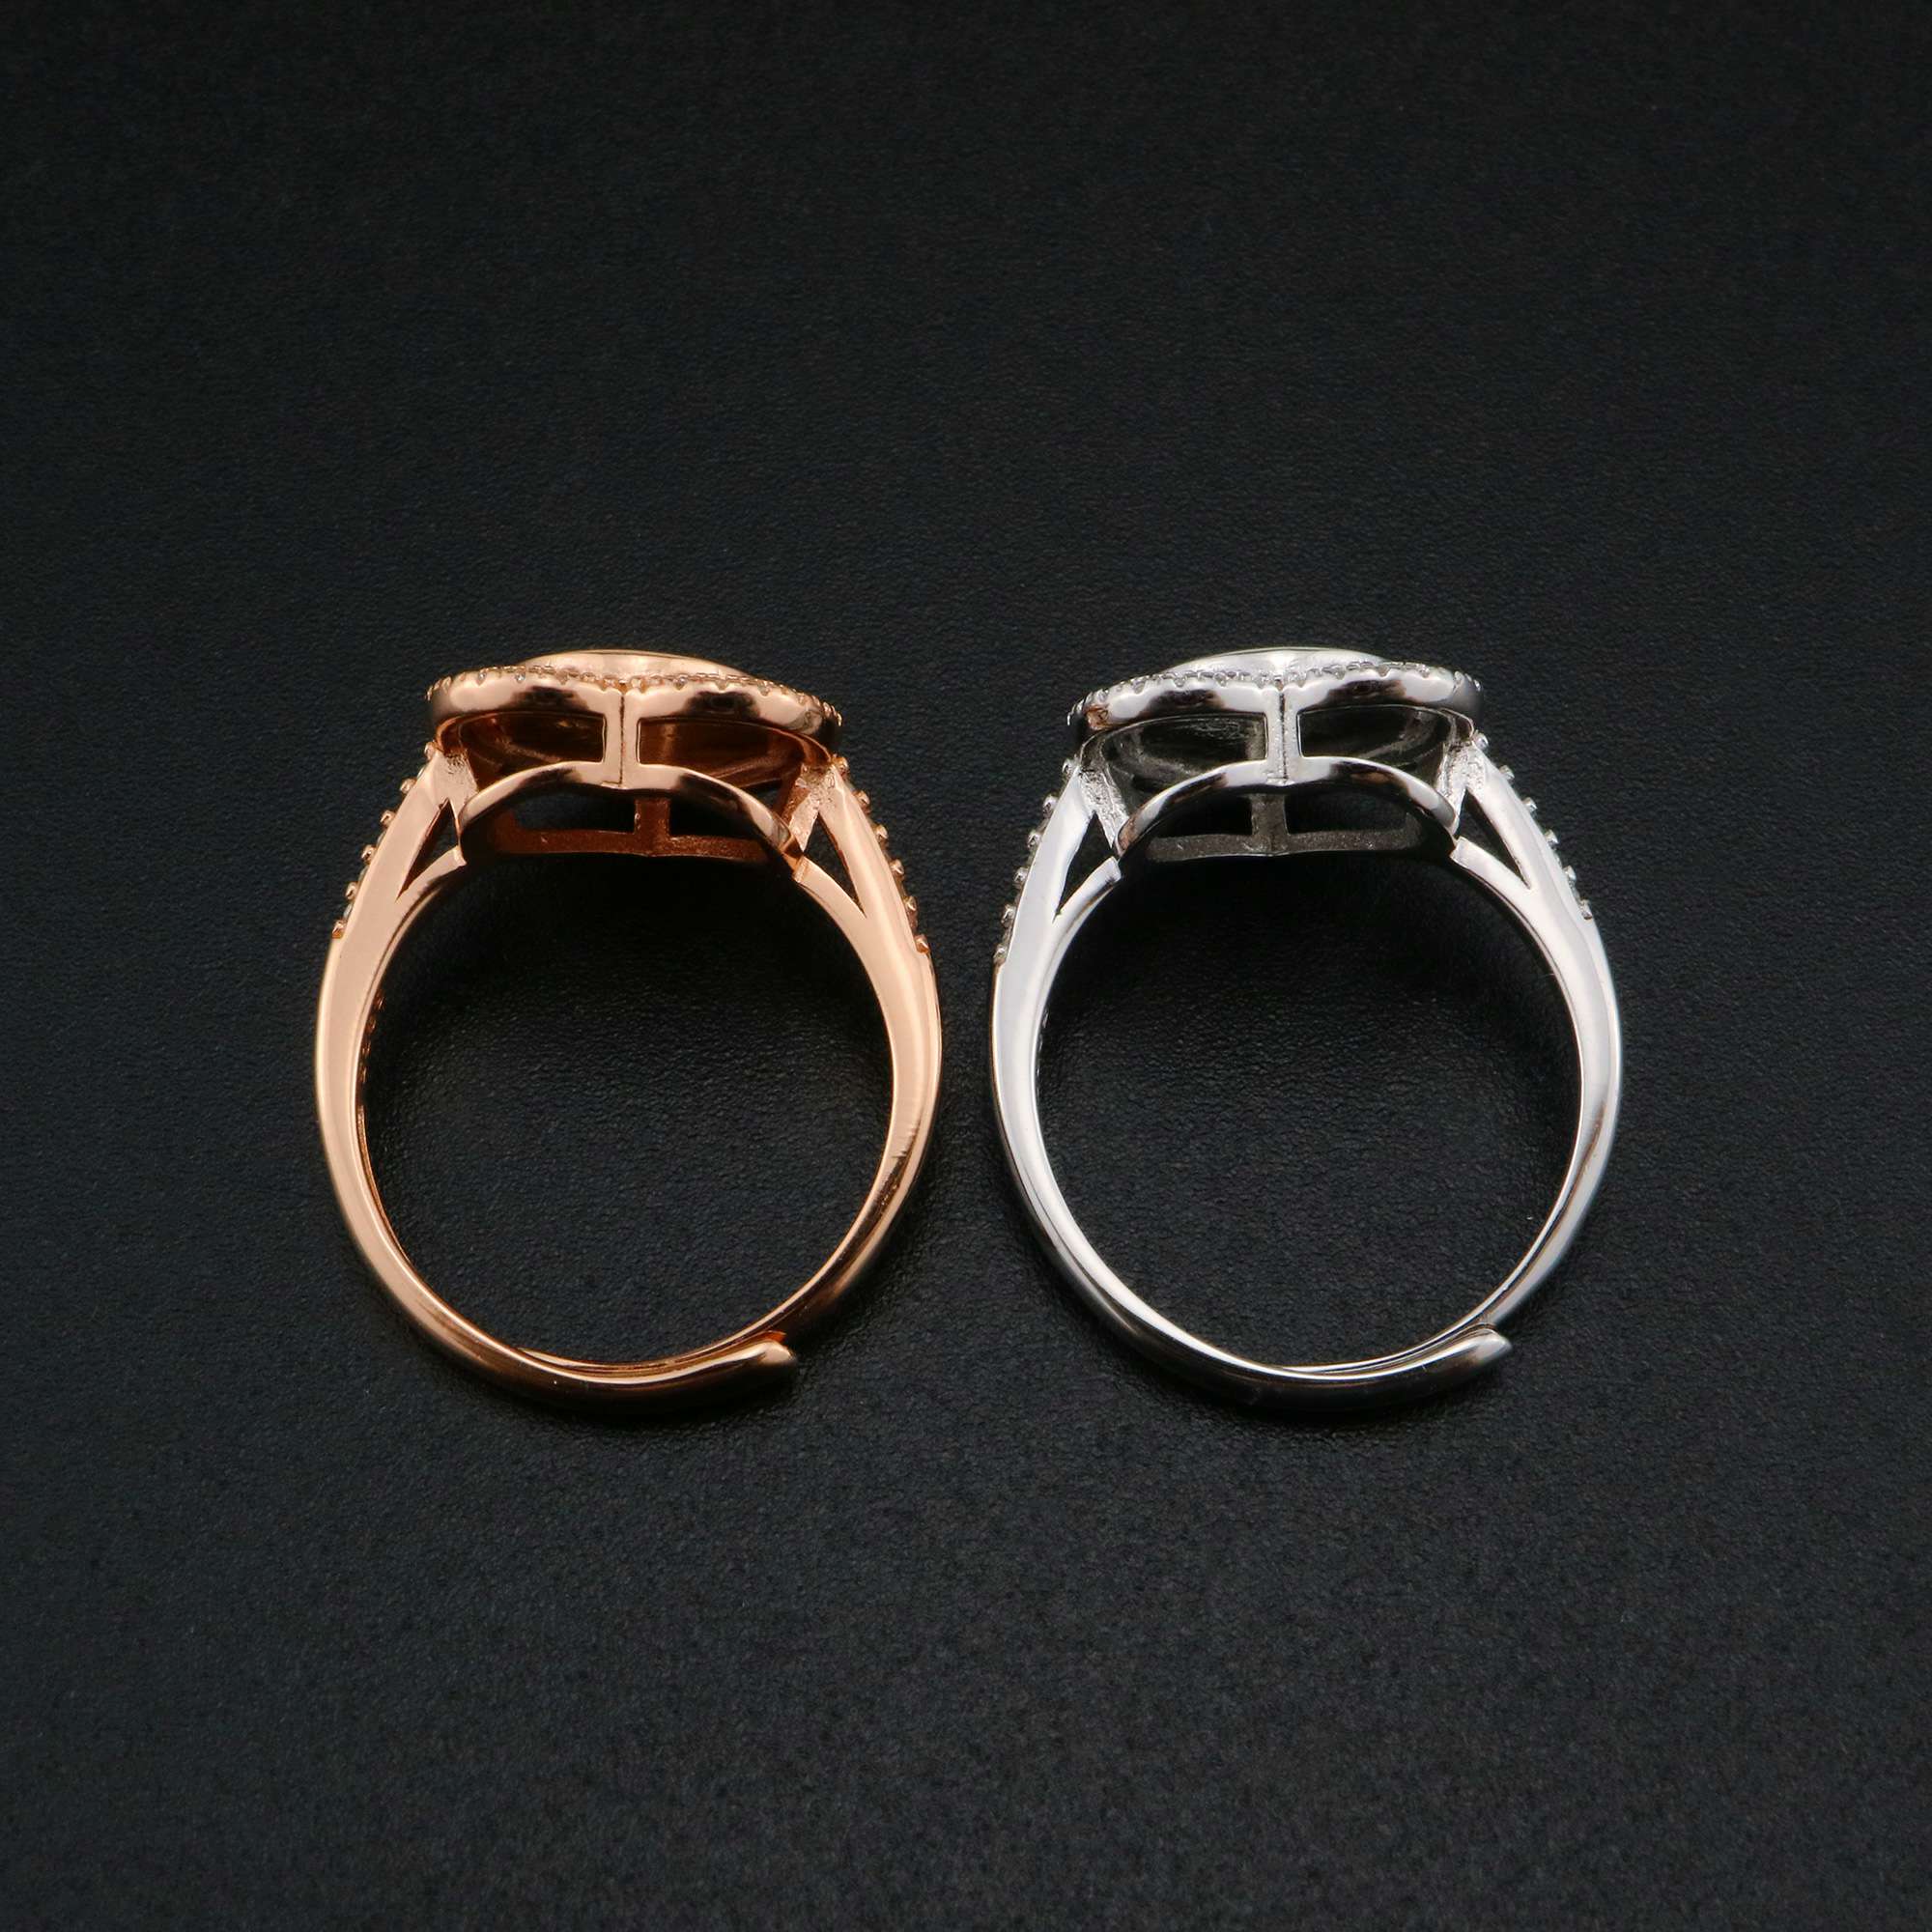 Keepsake Breast Milk Resin Ring Settings Round Solid Back 925 Sterling Silver Rose Gold Plated 8MM Halo Heart CZ Stone Ring Bezel 1210093 - Click Image to Close